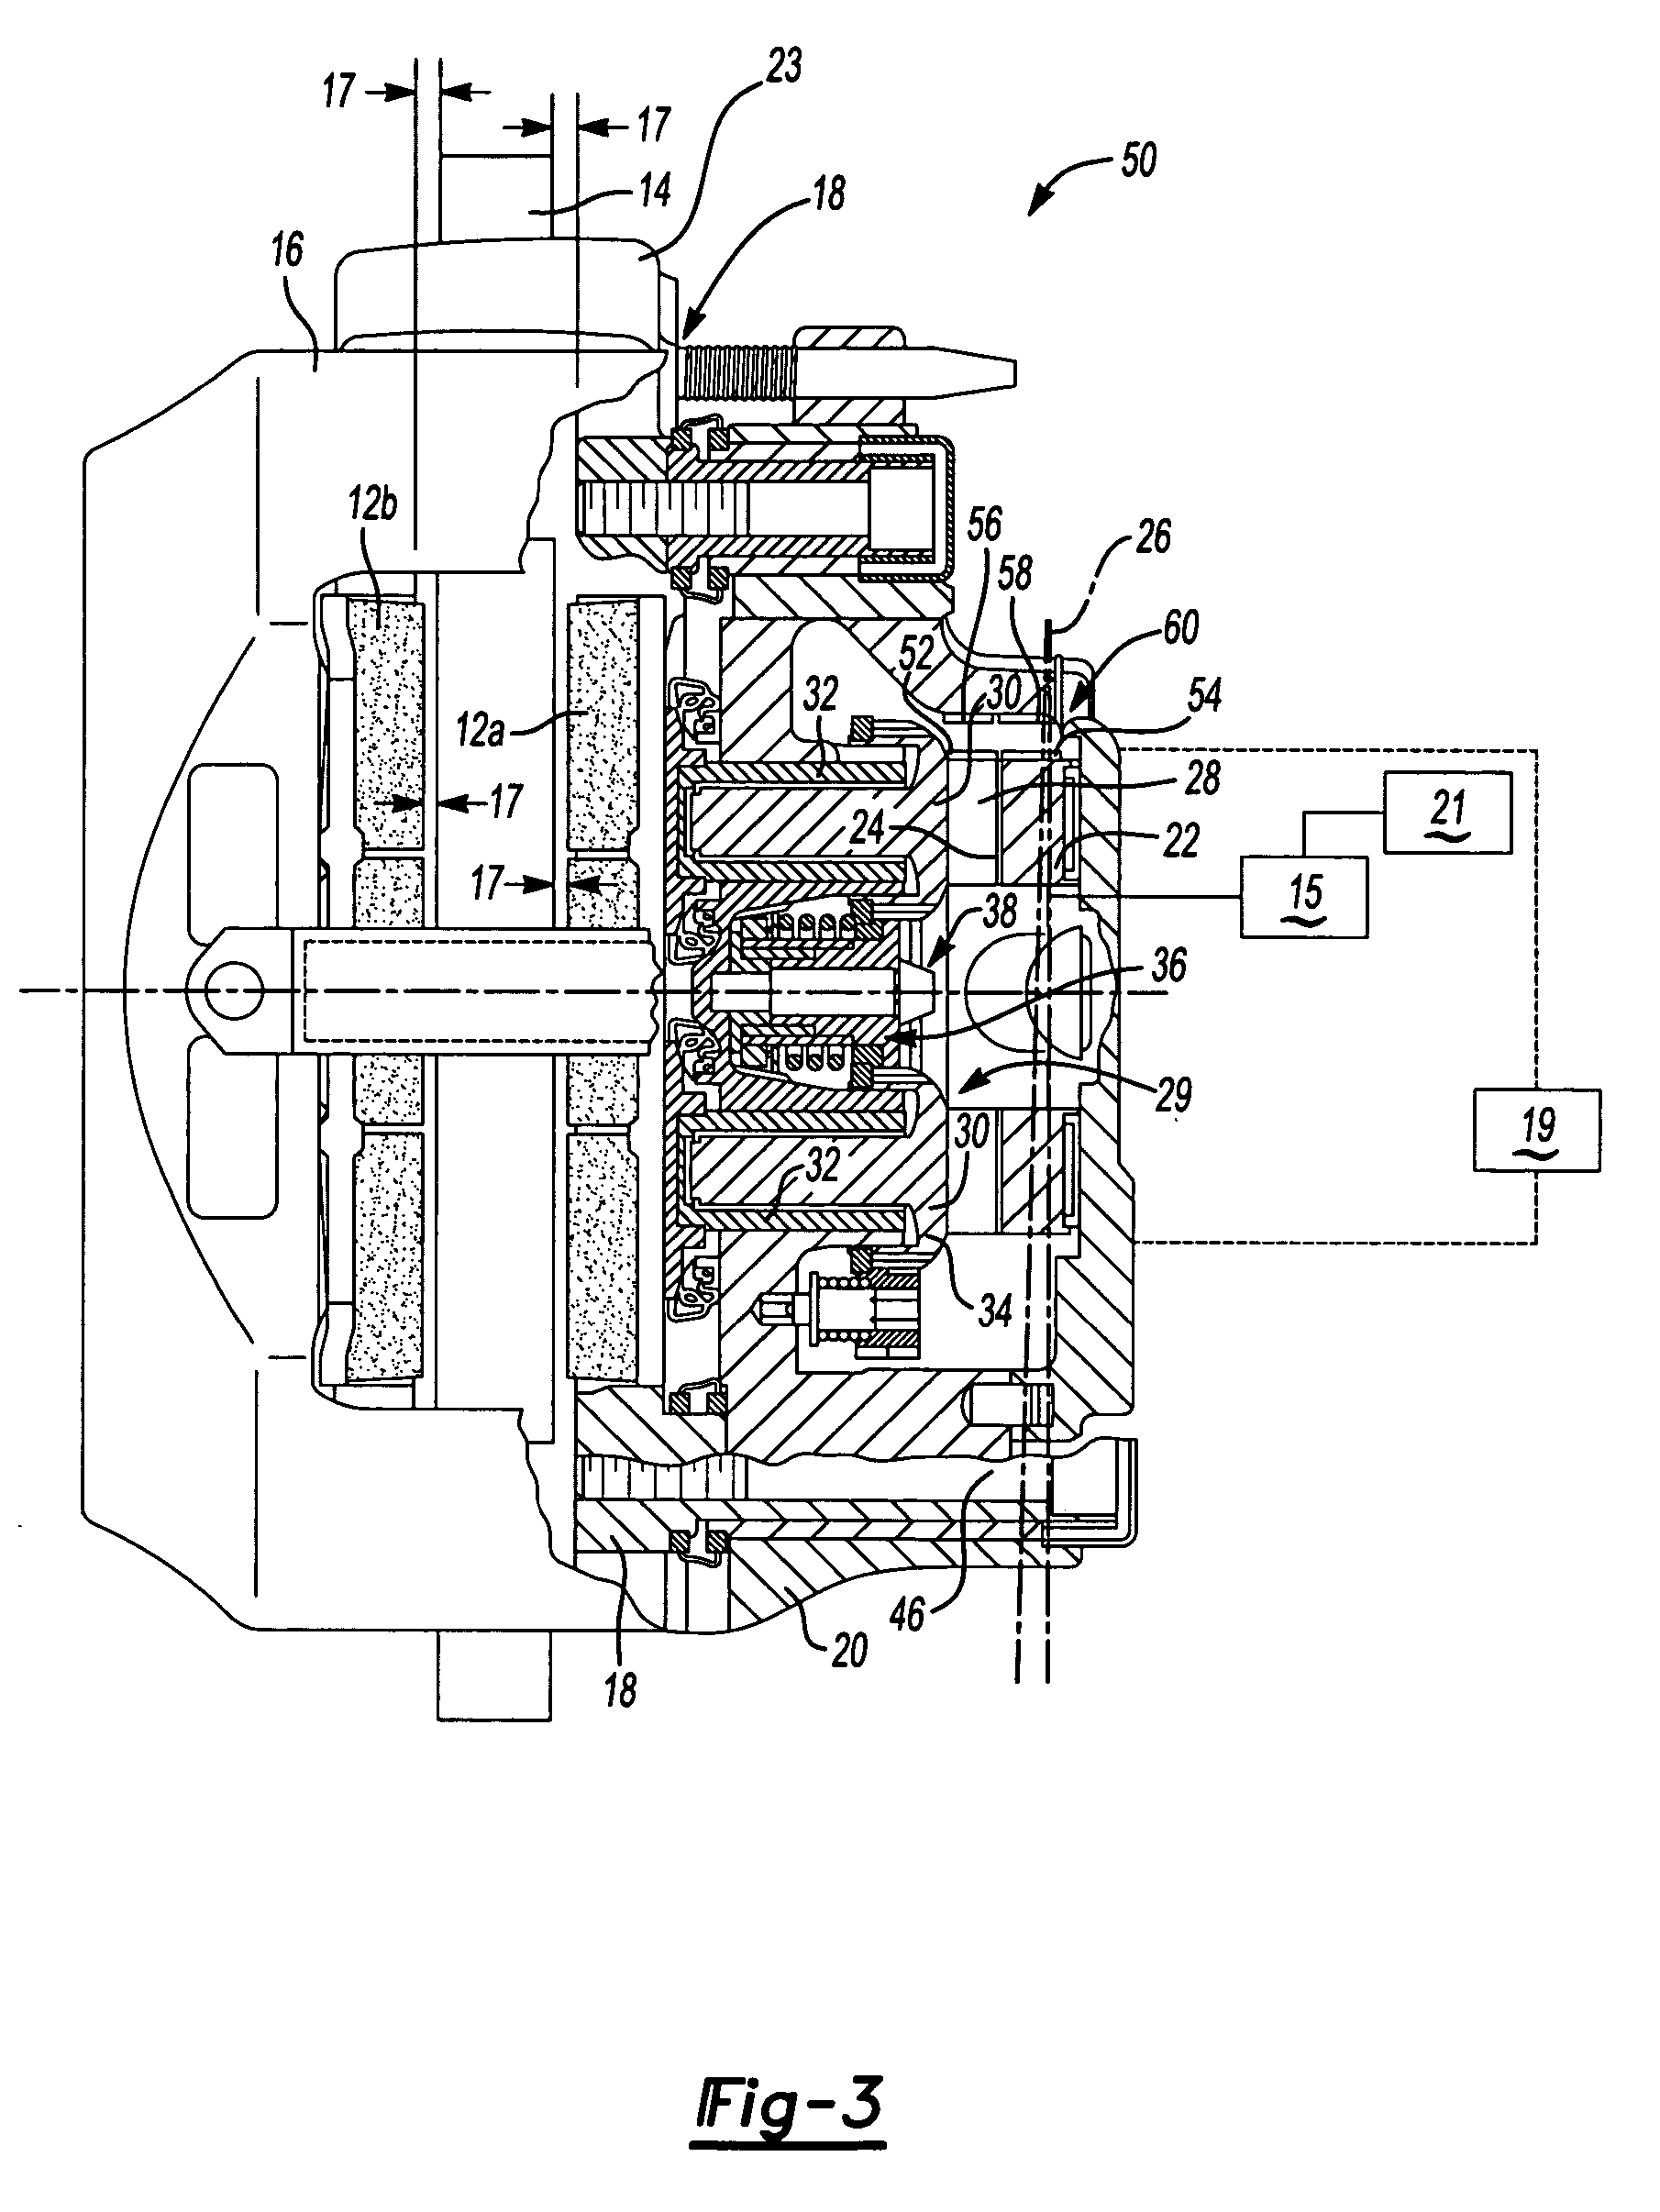 Brake assembly with brake pad position and wear sensor